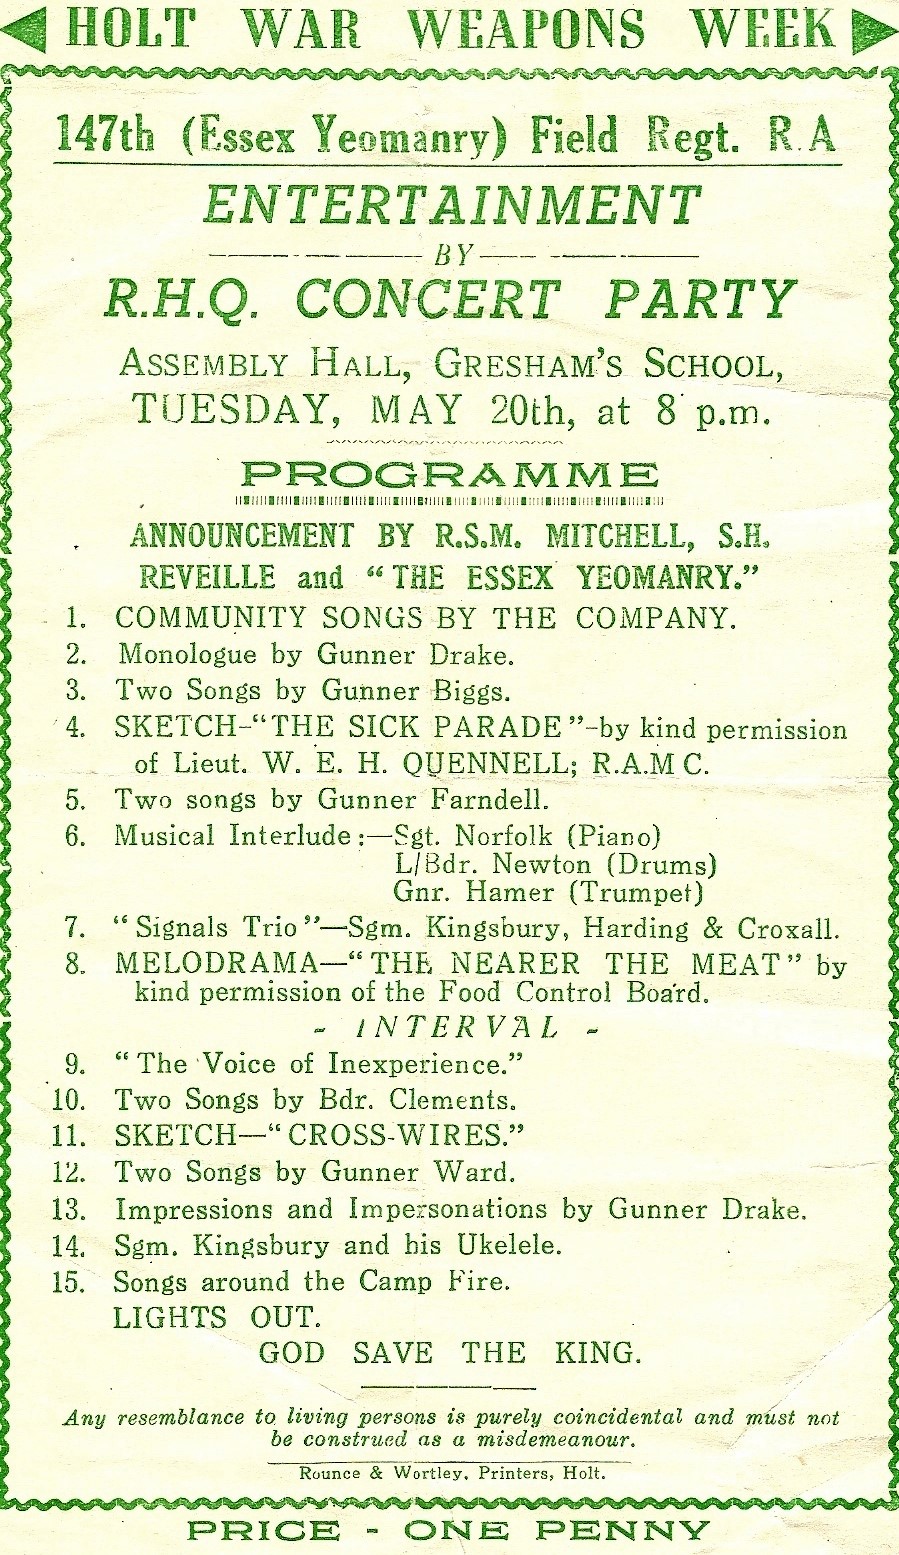 20 May 1941. 147th (Essex Yeomanry) Field Regt. R.A.   R.H.Q. Concert Party Programme. Holt War Weapons Week. Courtesy/© of The Felix R. Johnson Collection.